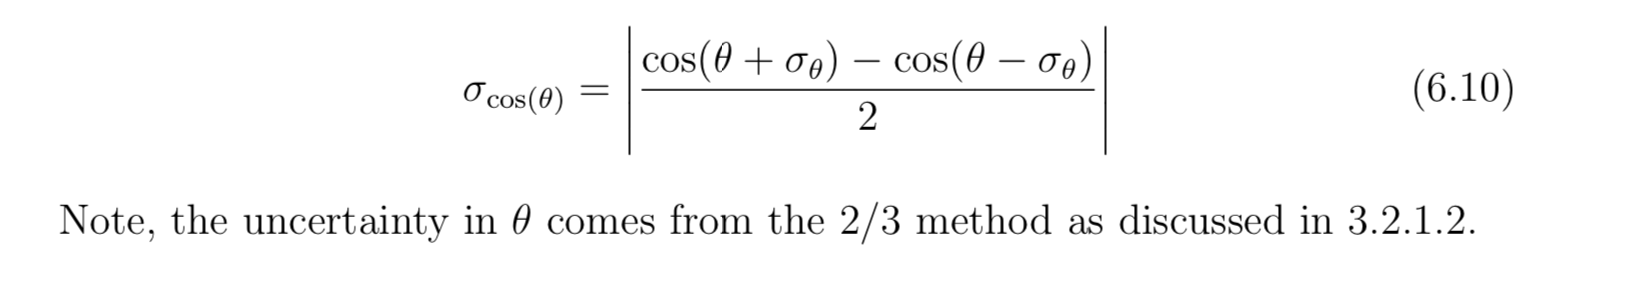 cos(0)cos(0 -
(6.10)
O cos(0)
2
Note, the uncertainty in 0 comes from the 2/3 method as discussed in 3.2.1.2
